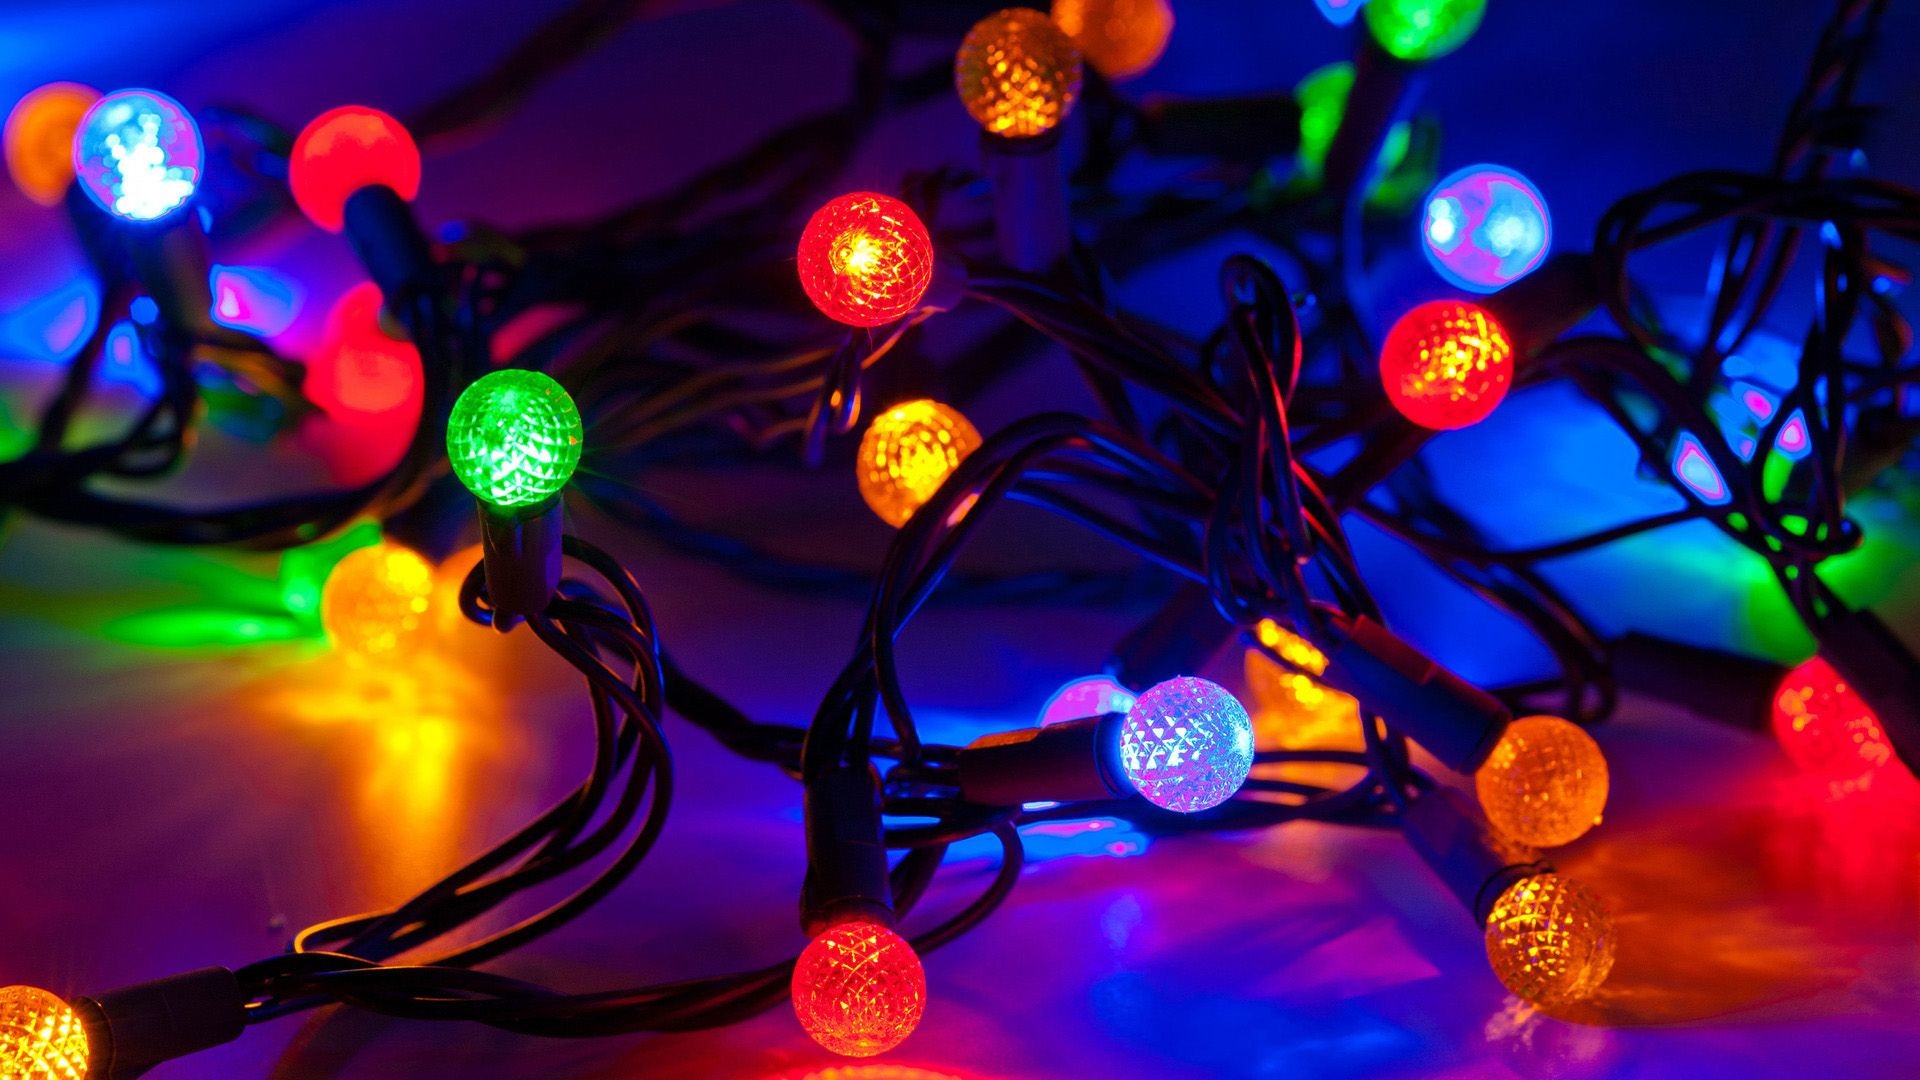 1920x1080 Christmas Lights HD Wallpapers :These Wallpaper Backgrounds Are Free o  Download And Available In High Definition For Your Desktop Pc And Laptops.